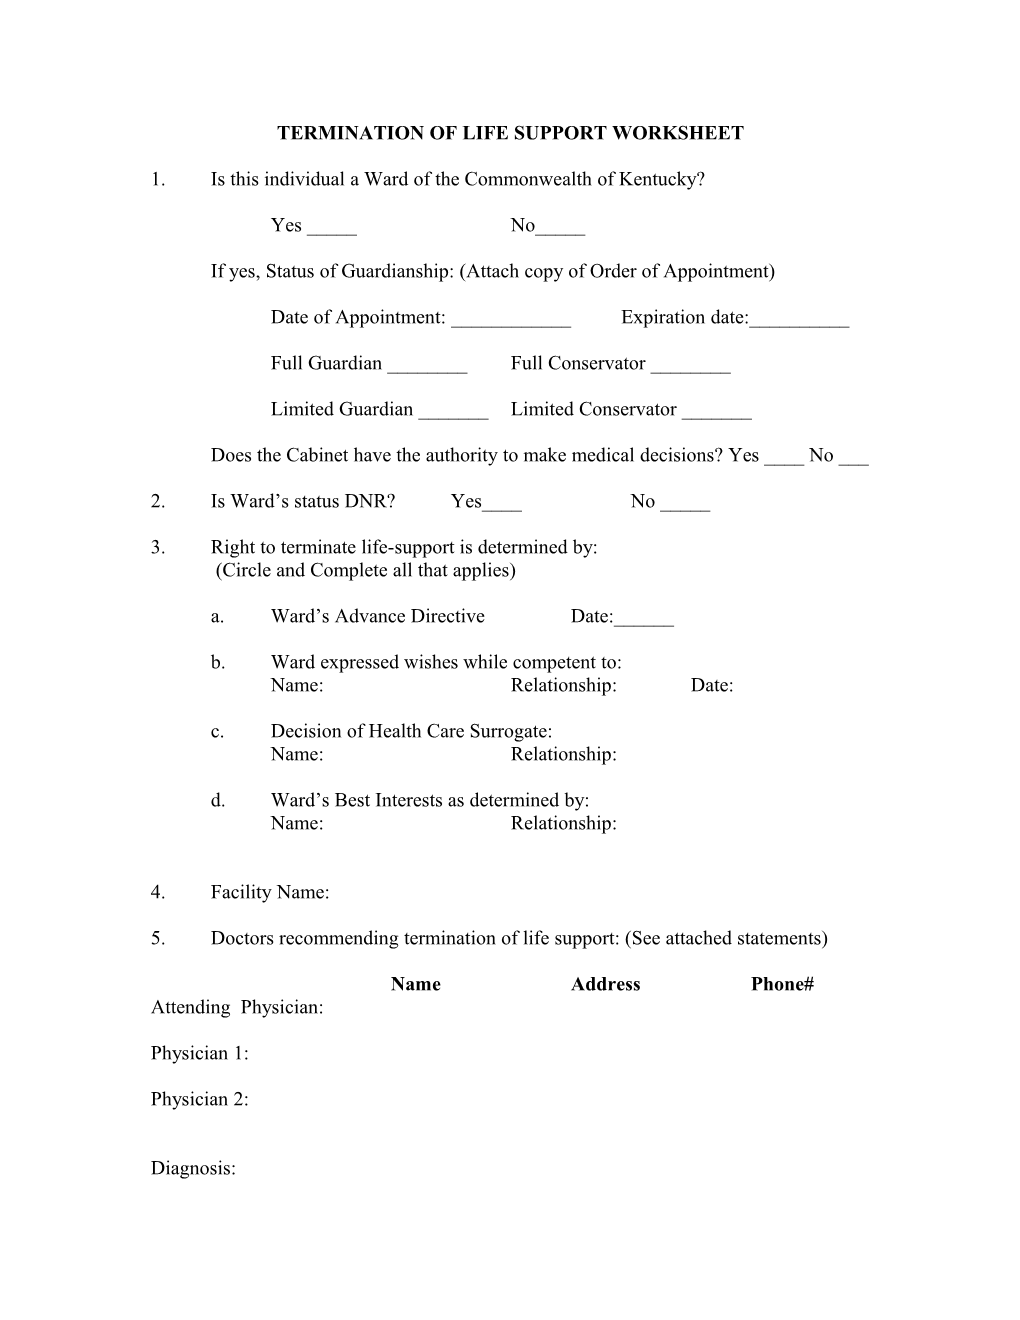 Termination of Life Support Worksheet